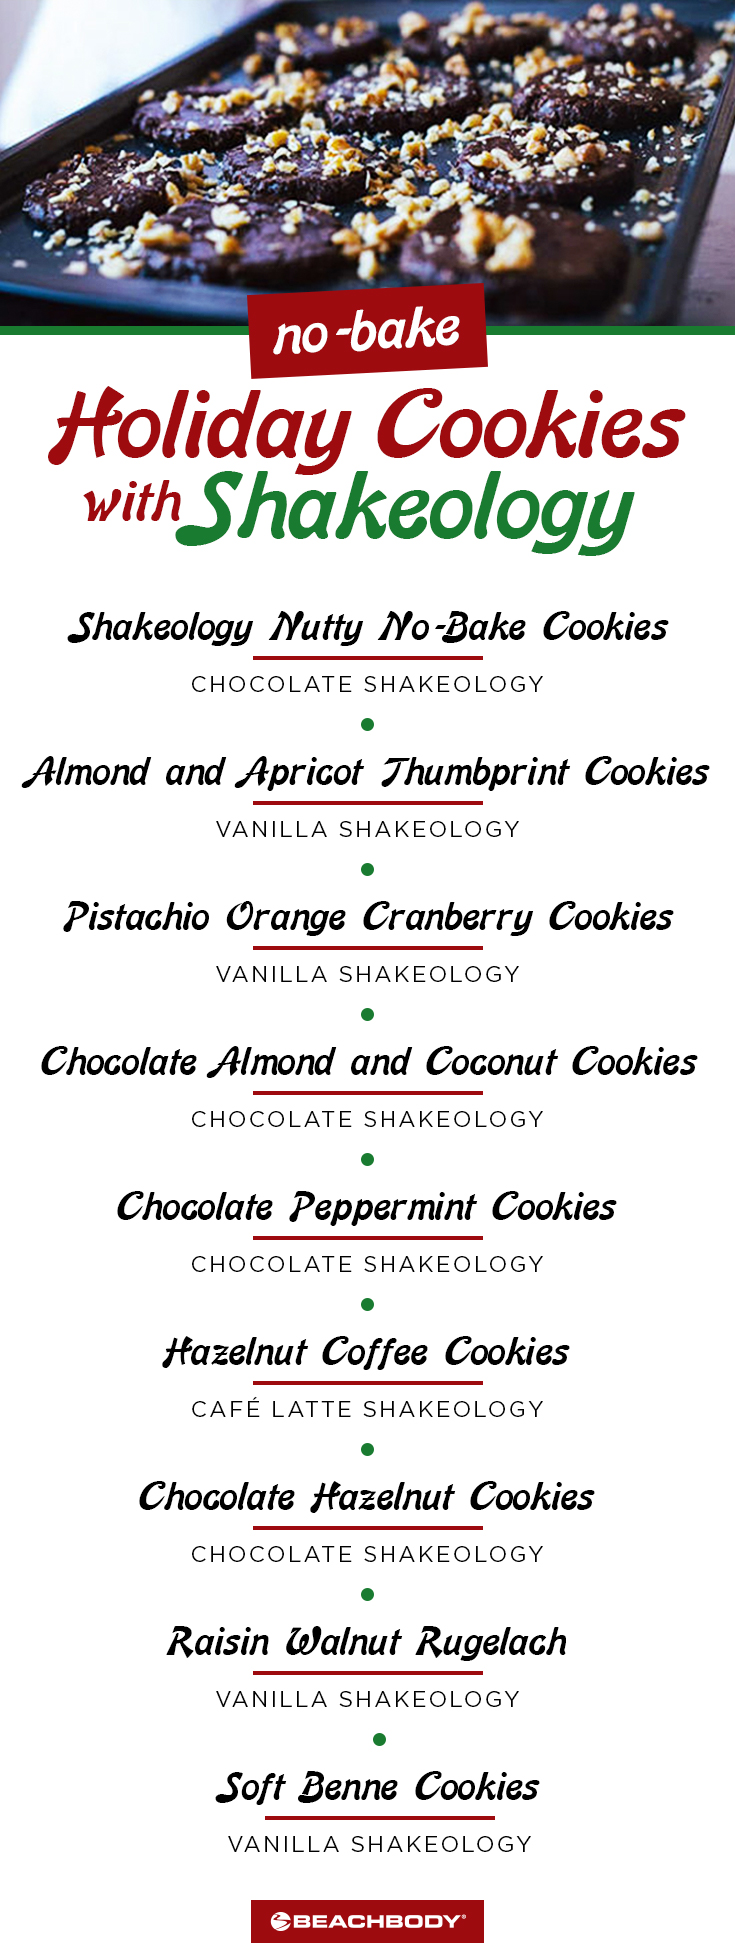 Healthy Recipes for No-Bake Holiday Cookies with Shakeology 